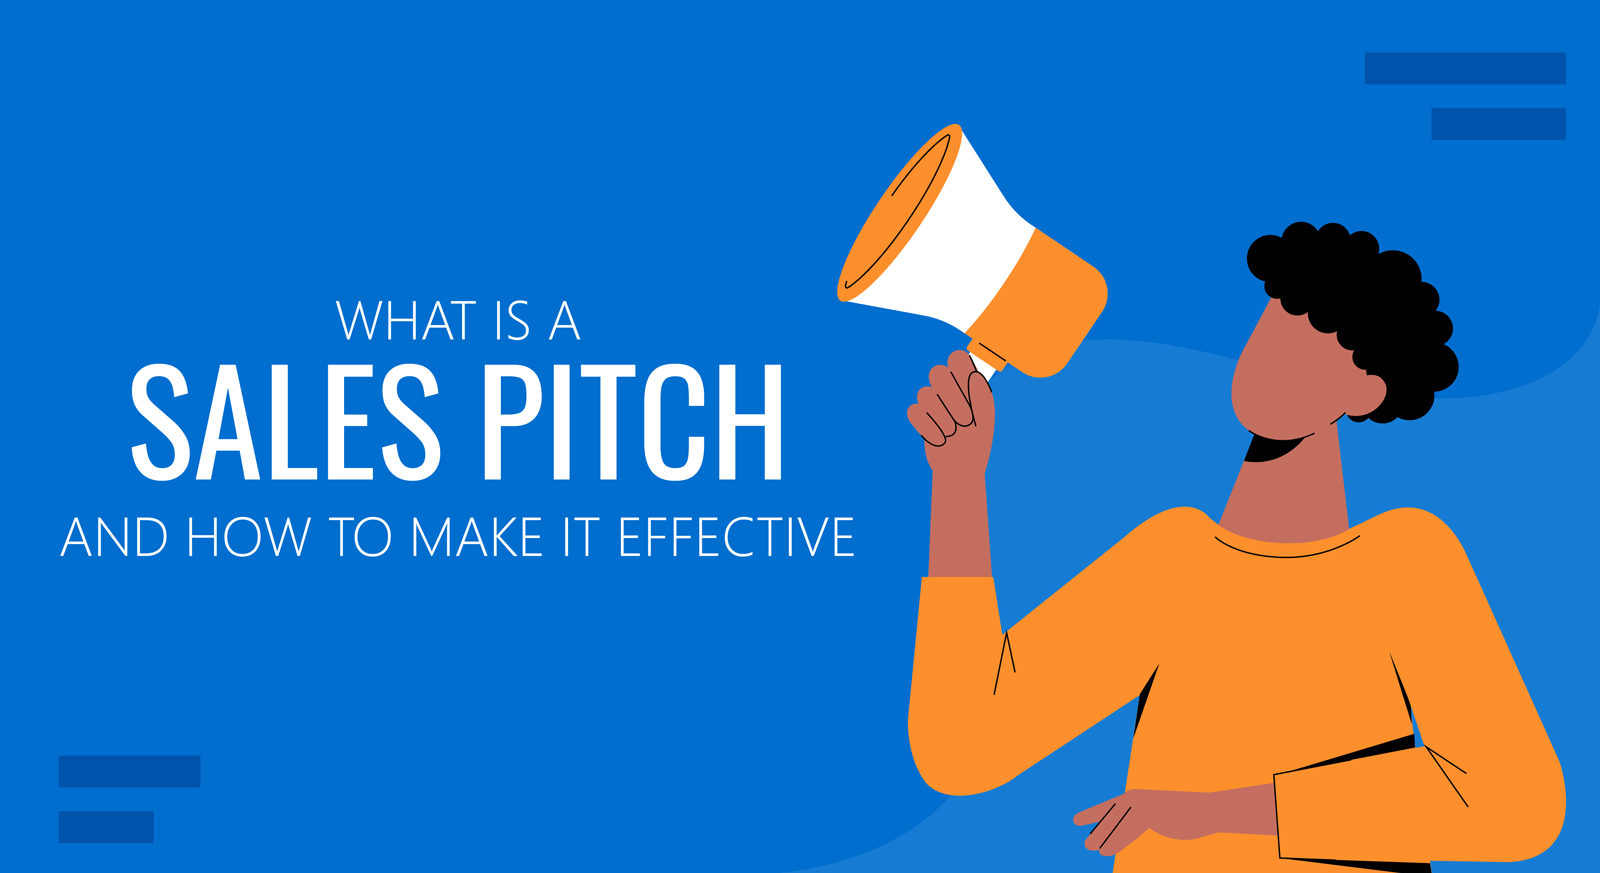 What is a Sales Pitch and How to Make an Effective Sales Pitch